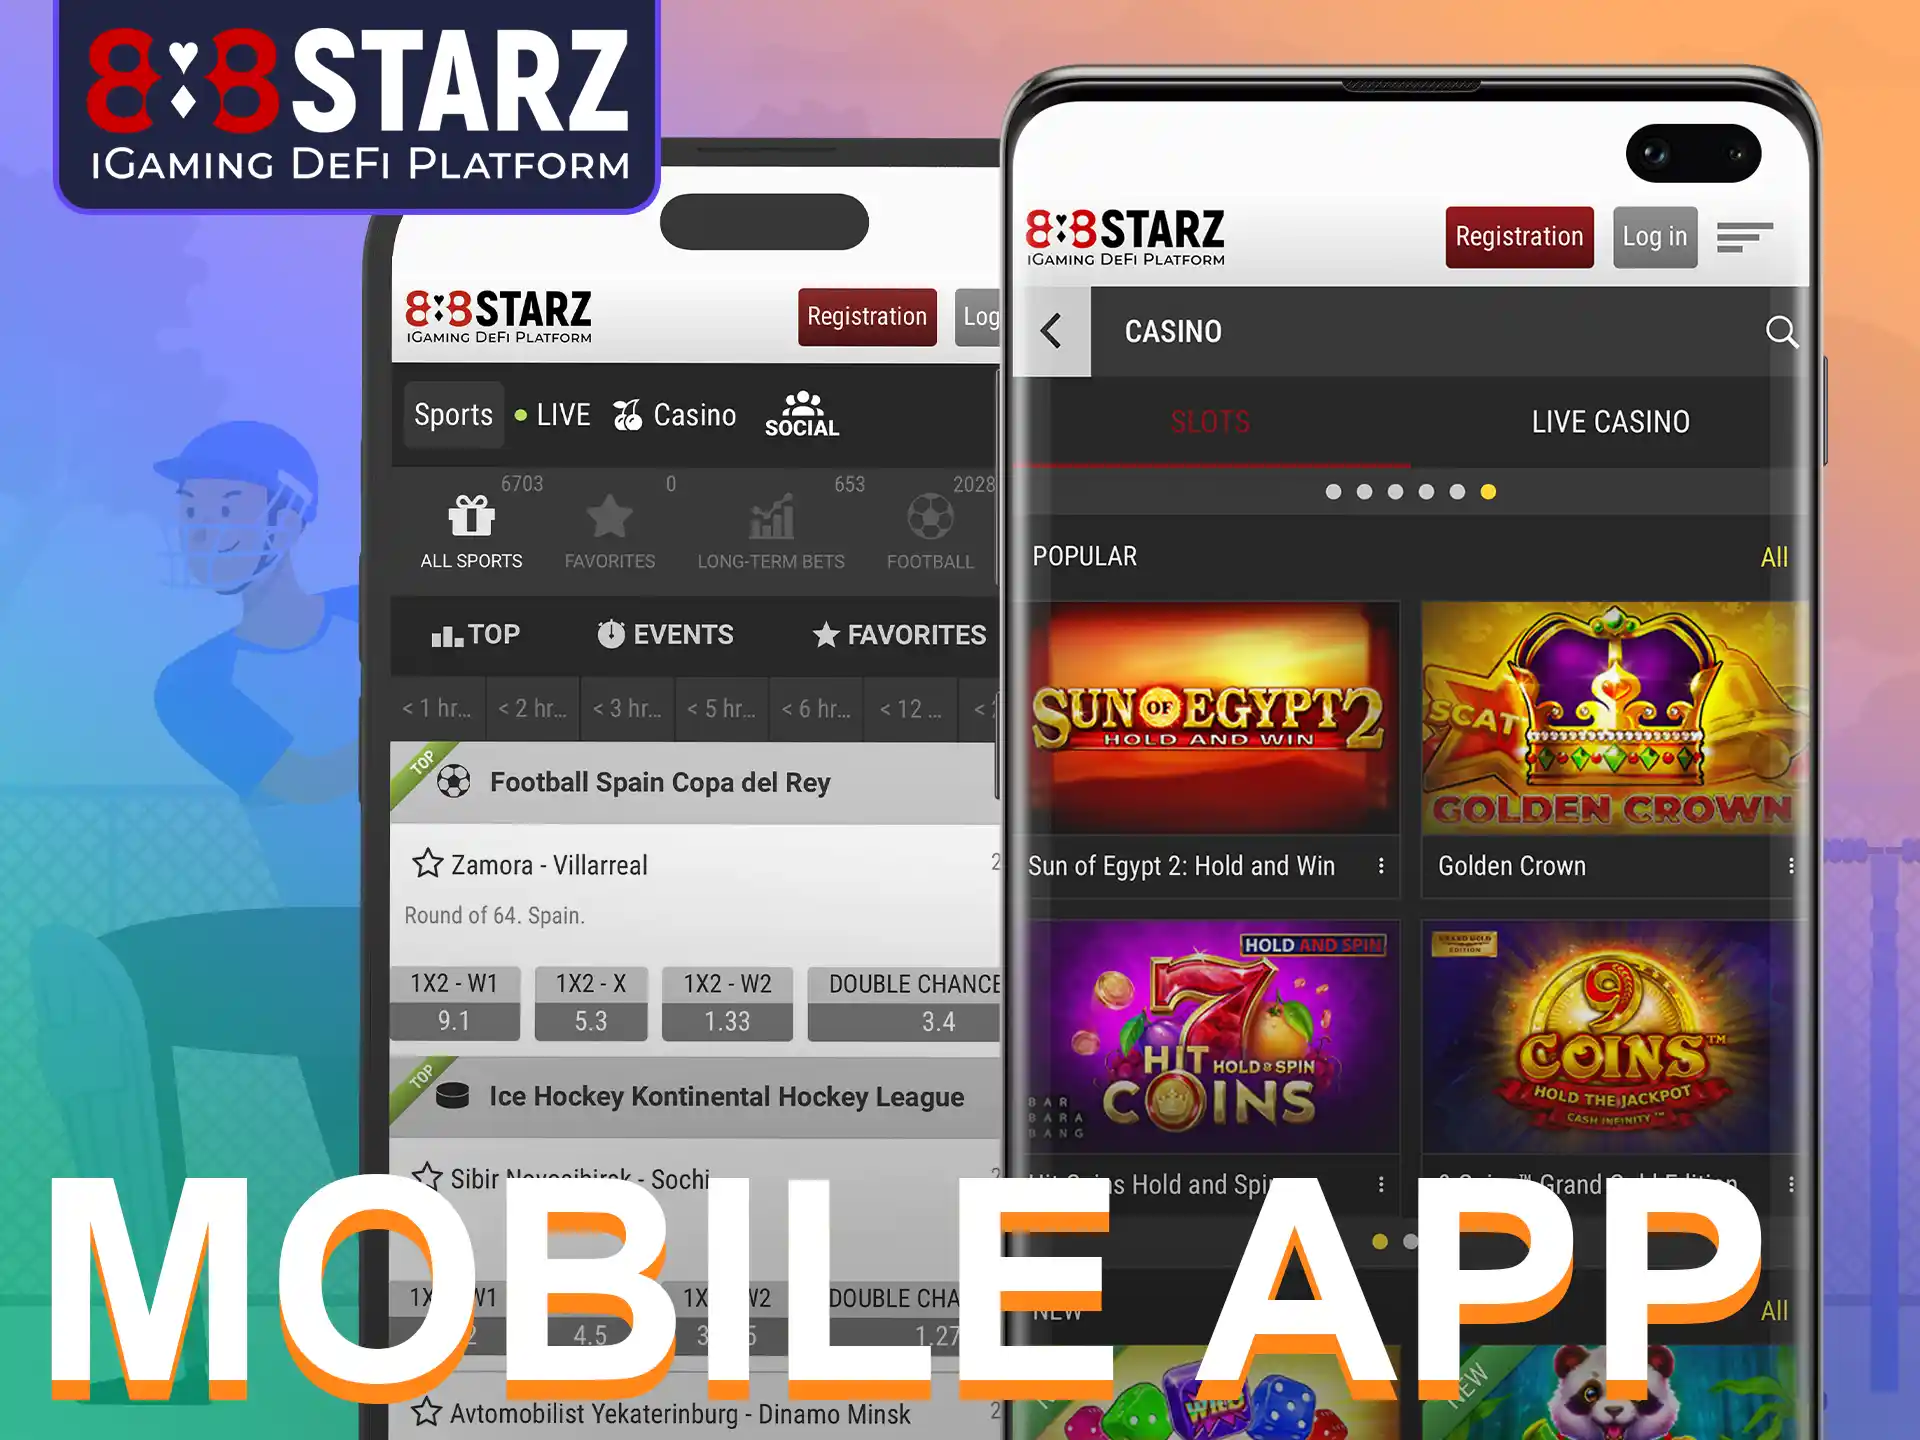 The 888Starz App is free for all users and has many features.